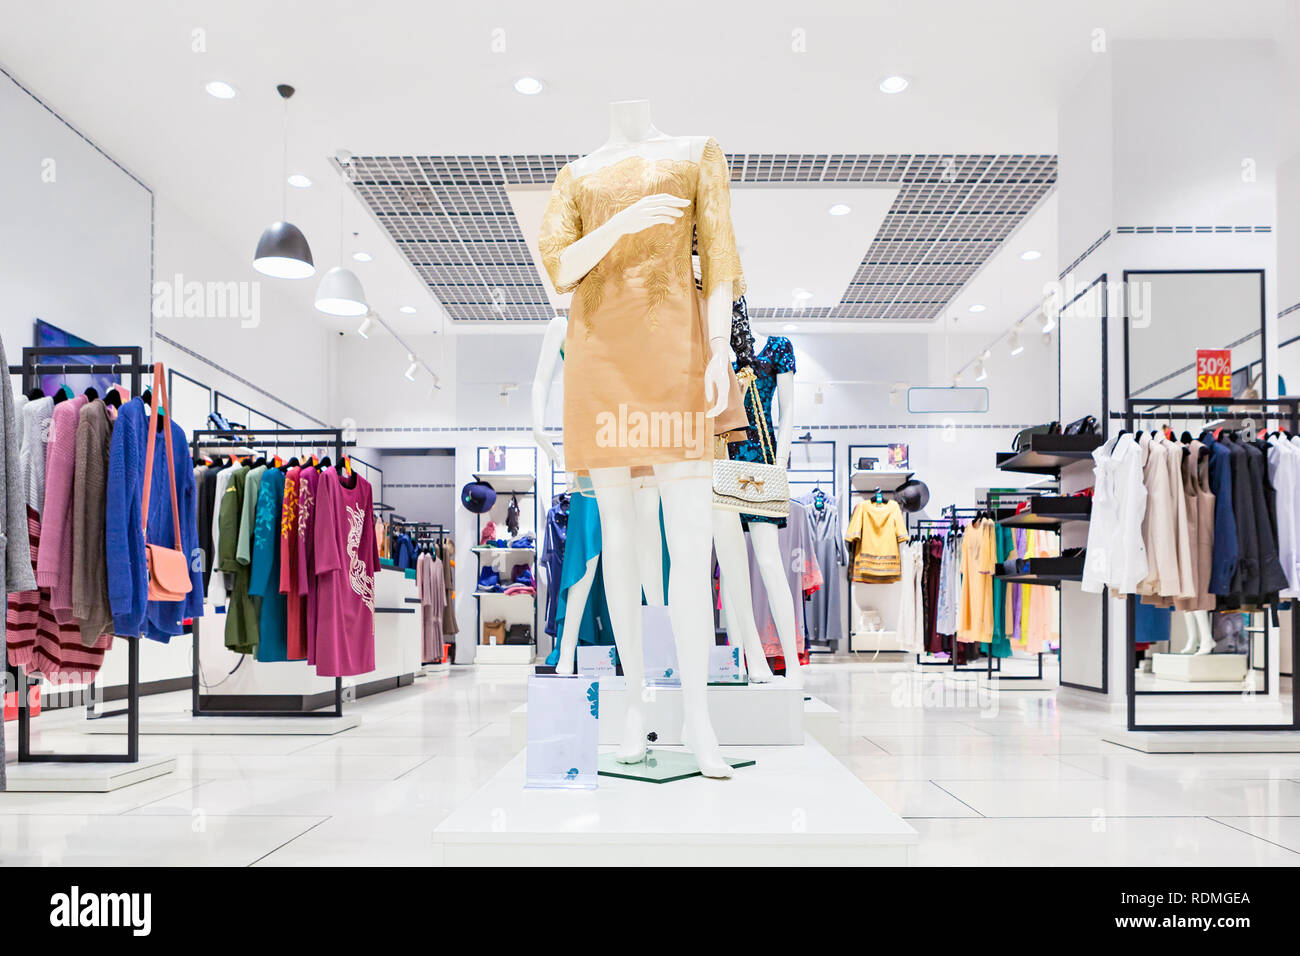 Interior of fashion clothing store for women Stock Photo - Alamy